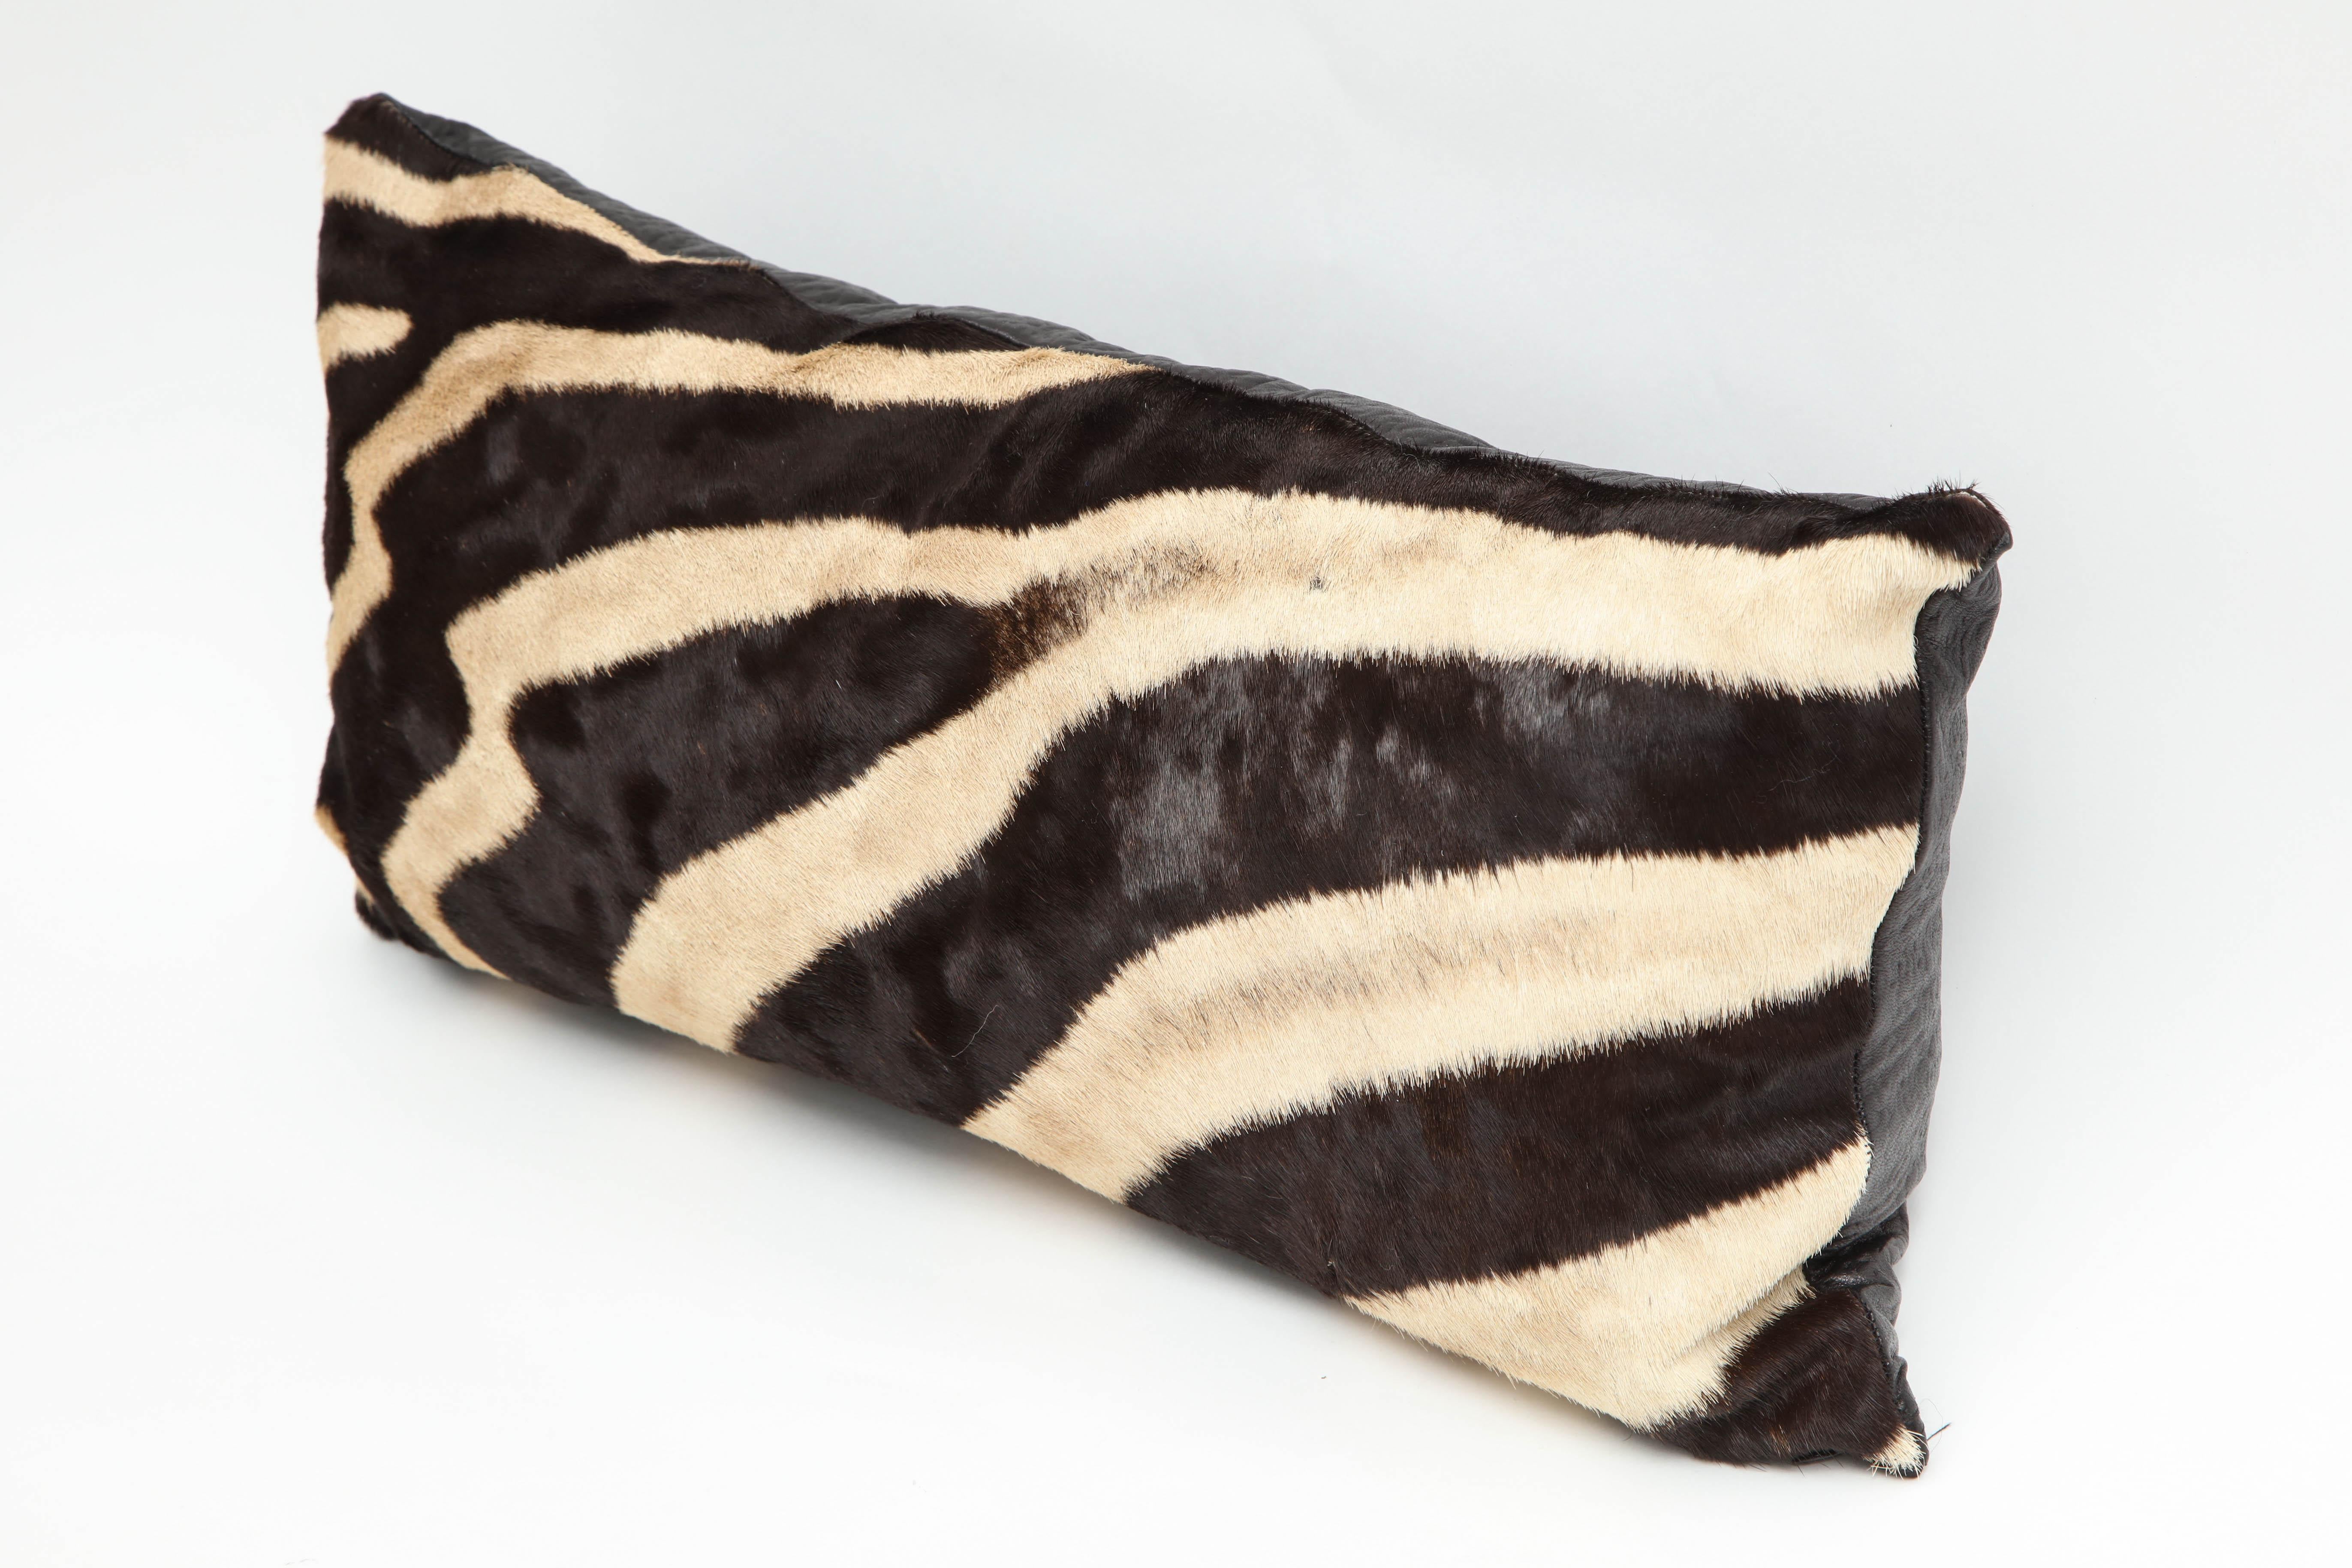 Zebra pillow. Measures: 20 inches by 10 inches. Zebra hide is from South Africa.
This pillow is sold but we have another one, very similar.